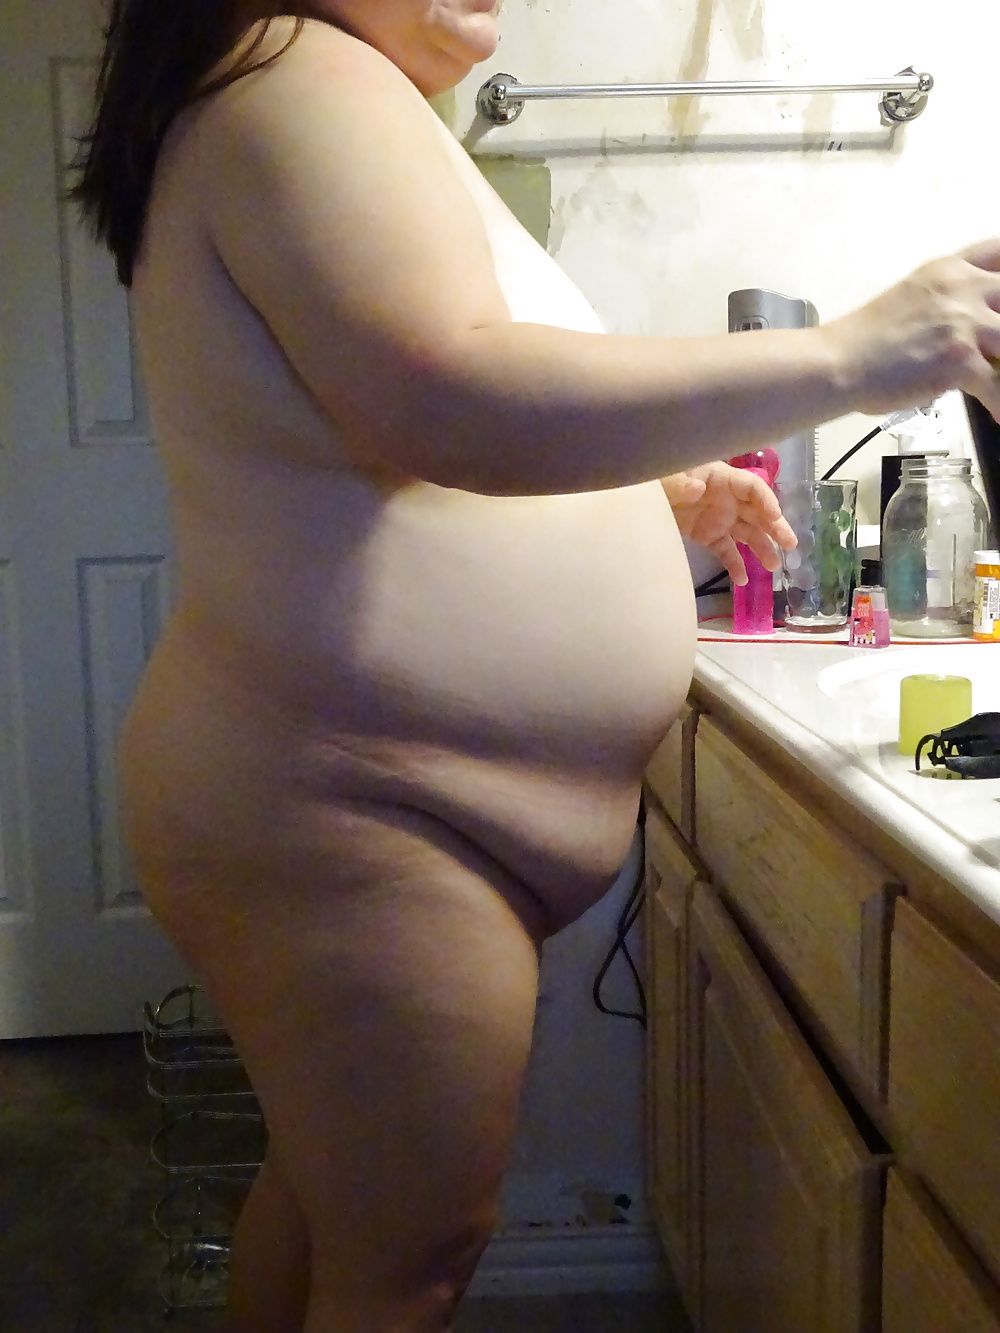 XXX new looks of wifes bigger body. Notice the gain?